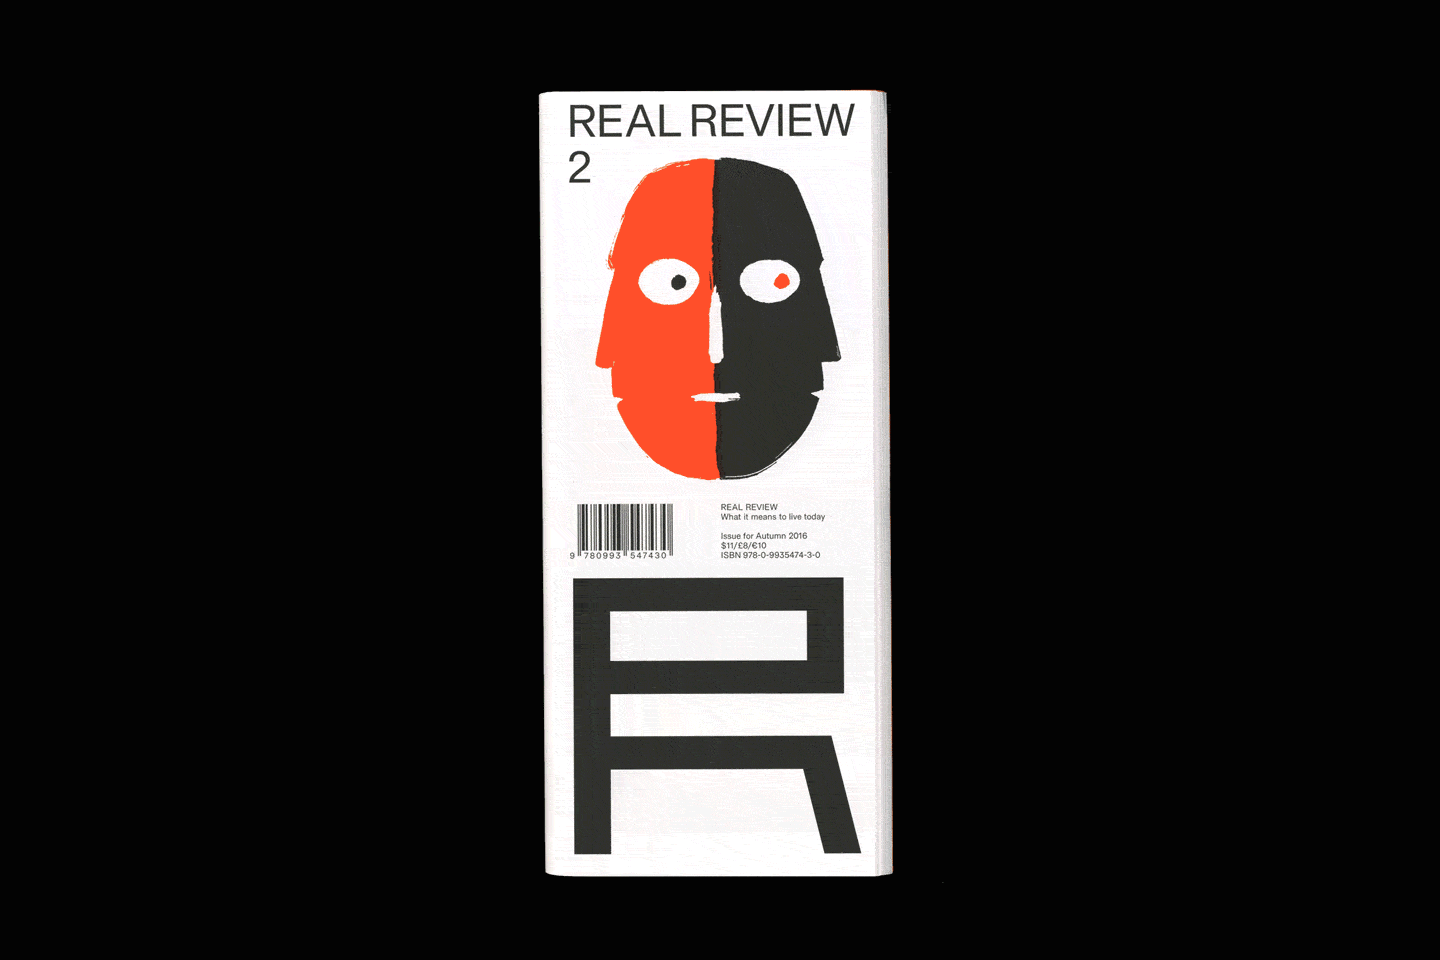 Real Review is a quarterly publication published by the REAL Foundation.